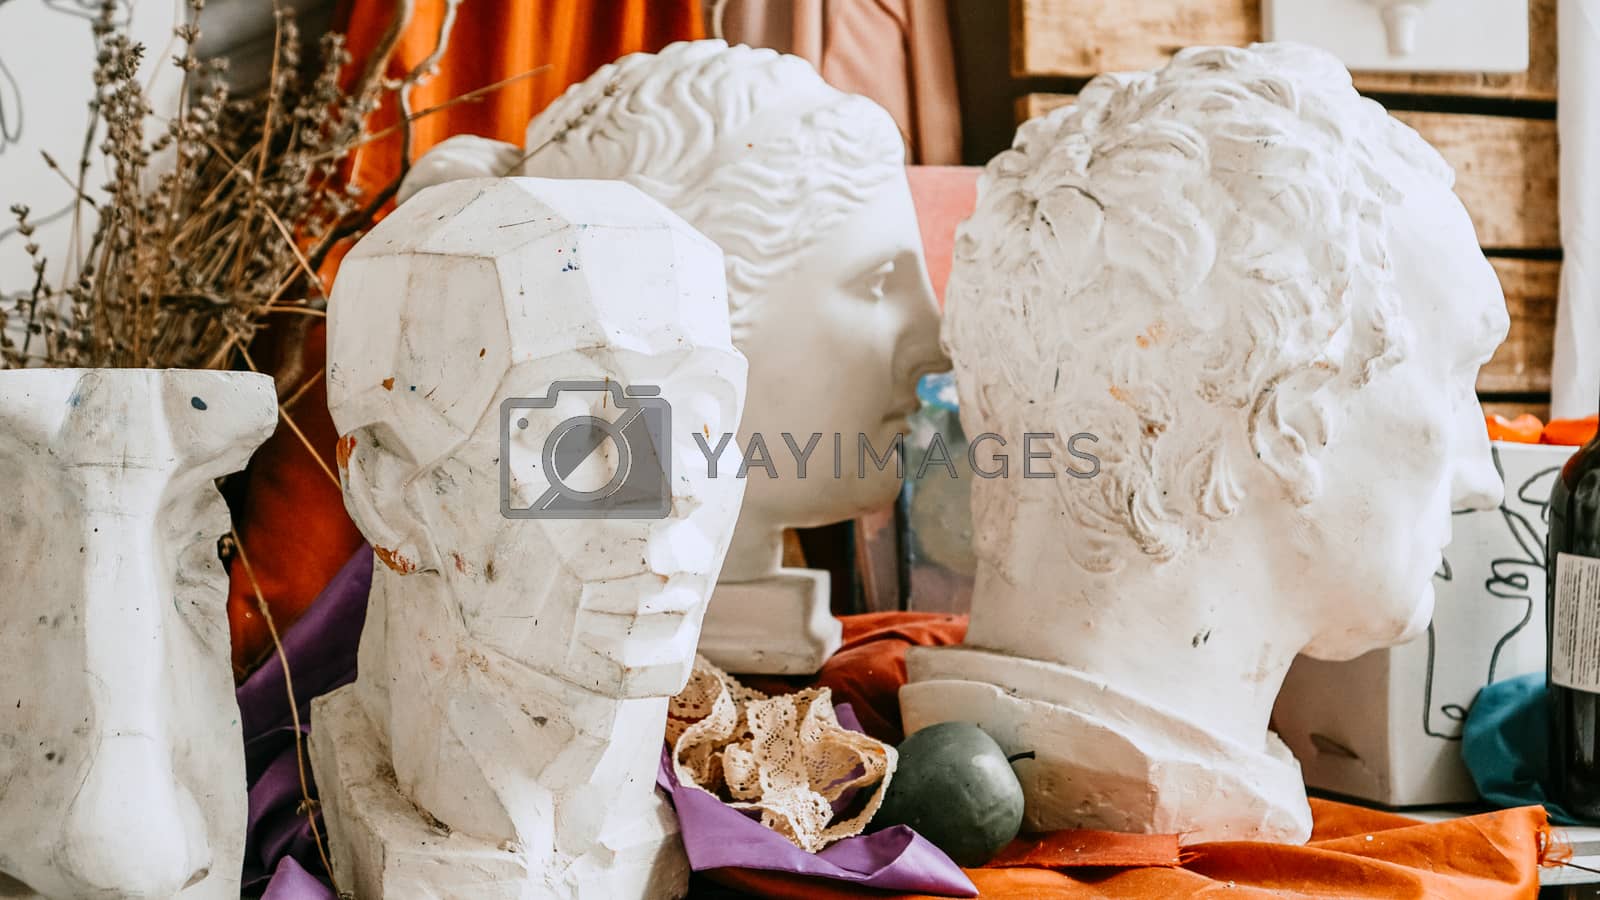 Royalty free image of Sculpture bust and tools in an art workshop by natali_brill